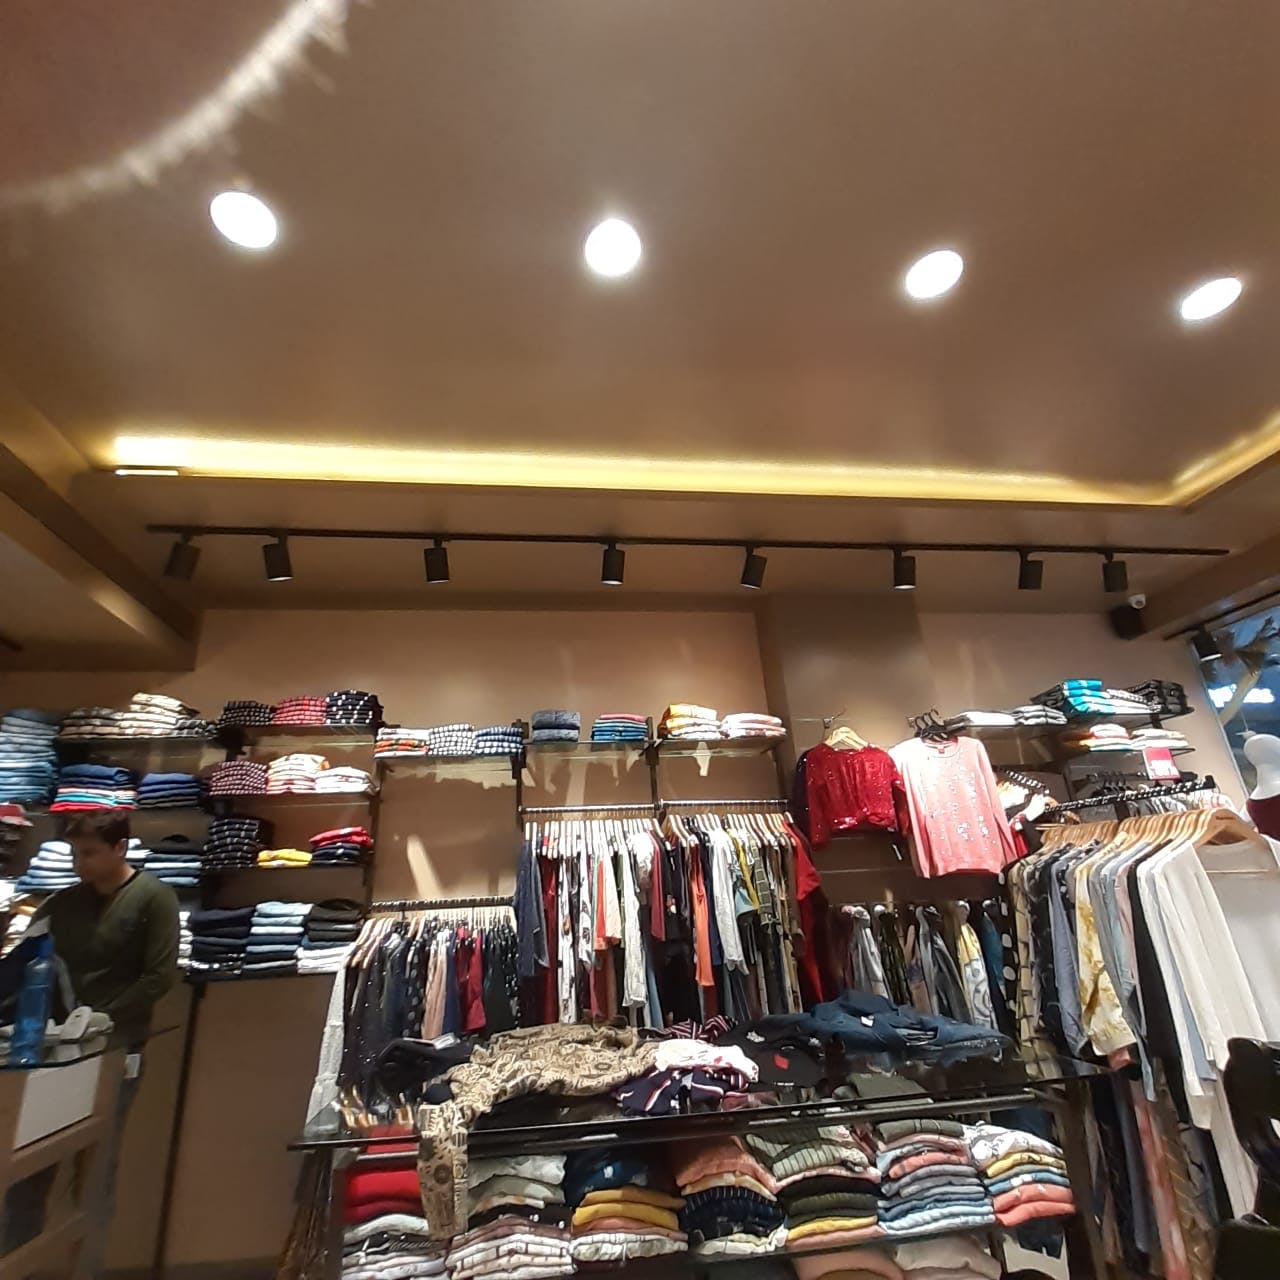 Outlet store,Retail,Building,Boutique,Room,Ceiling,Footwear,Shopping,Shopping mall,Shoe